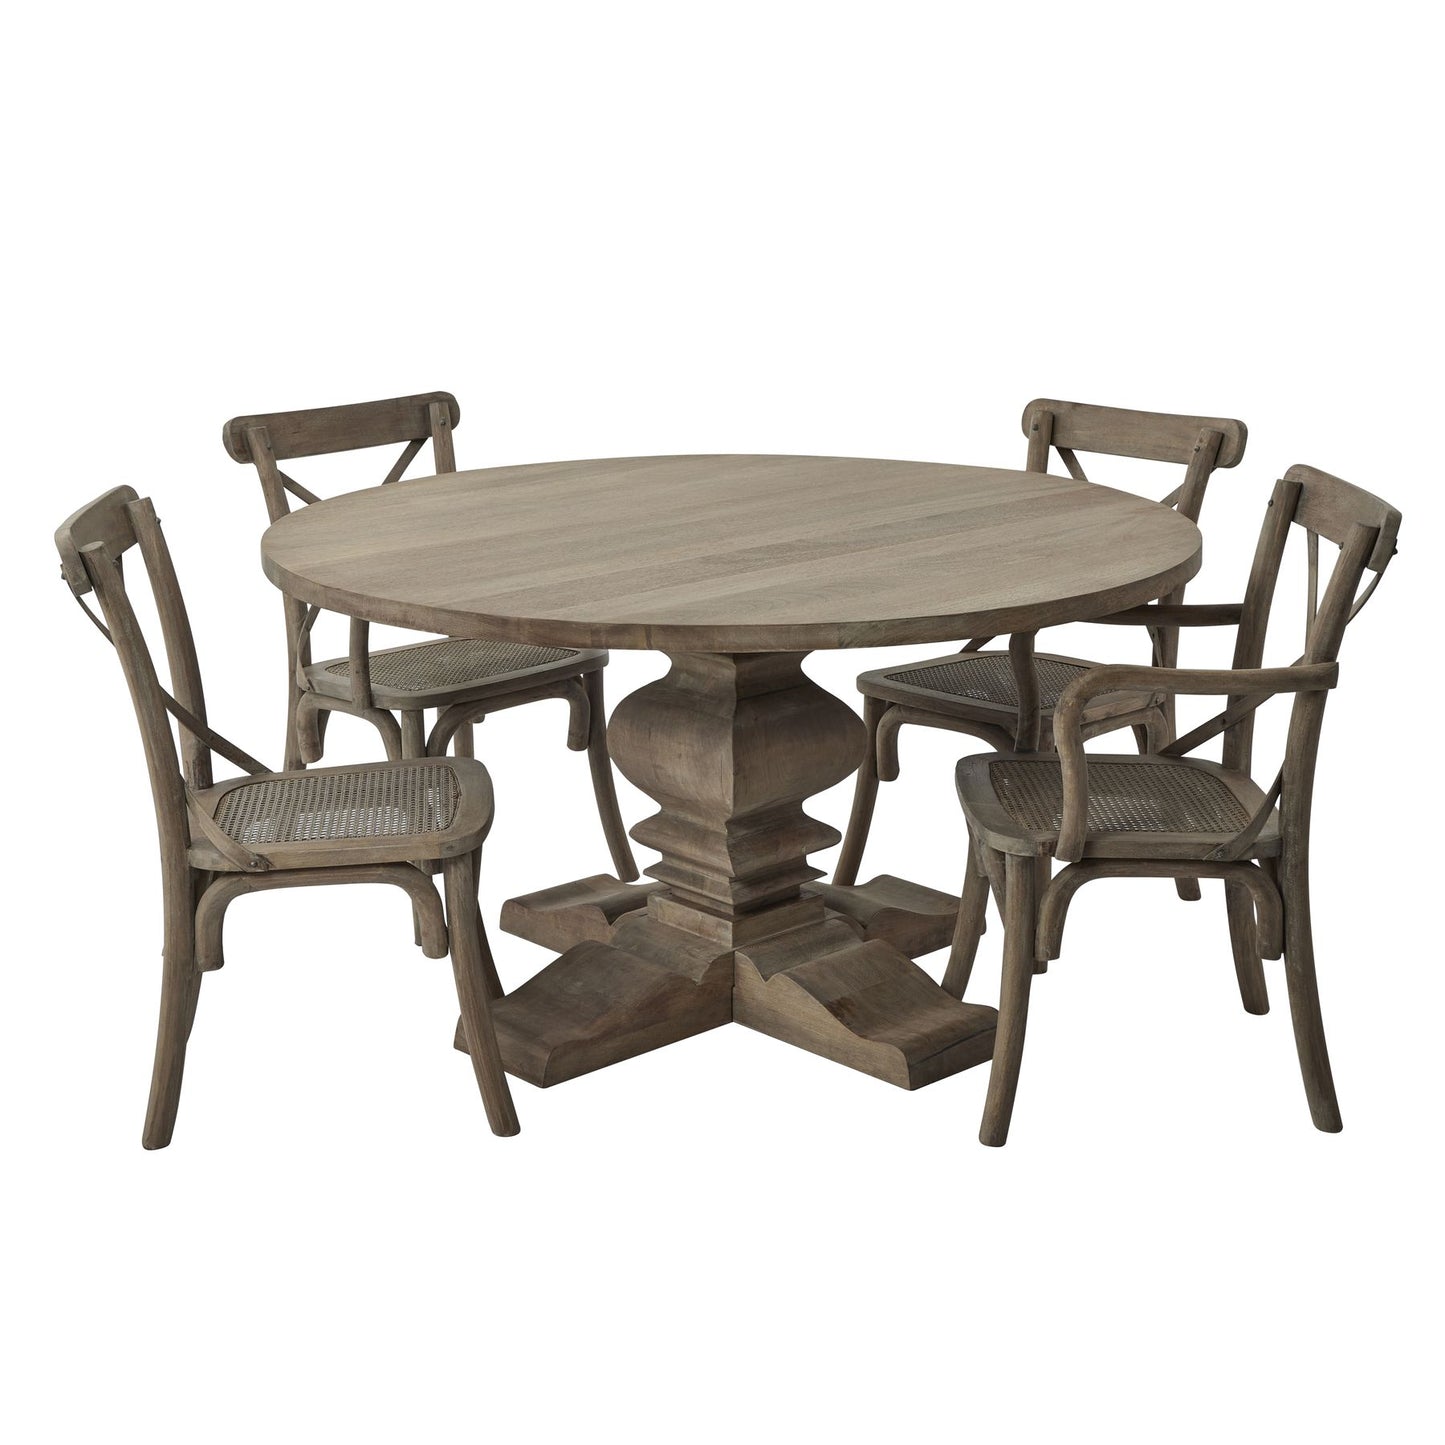 Chateau Cross Back Carver Dining Chair